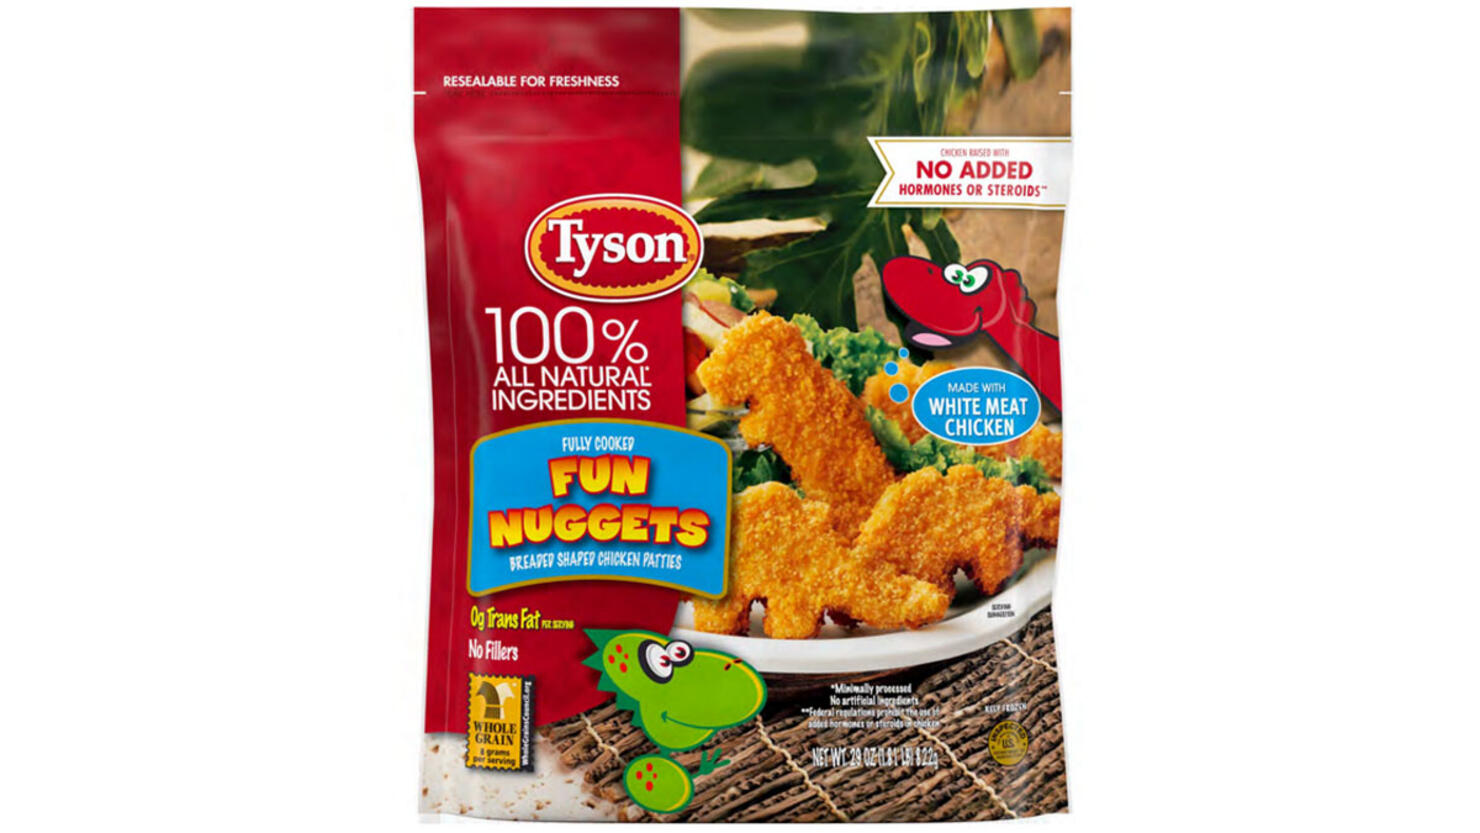 29-oz. Plastic bag packages containing “Tyson FULLY COOKED FUN NUGGETS BREADED SHAPED CHICKEN PATTIES” with a Best If Used By date of SEP 04, 2024, and lot codes 2483BRV0207, 2483BRV0208, 2483BRV0209 and 2483BRV0210.